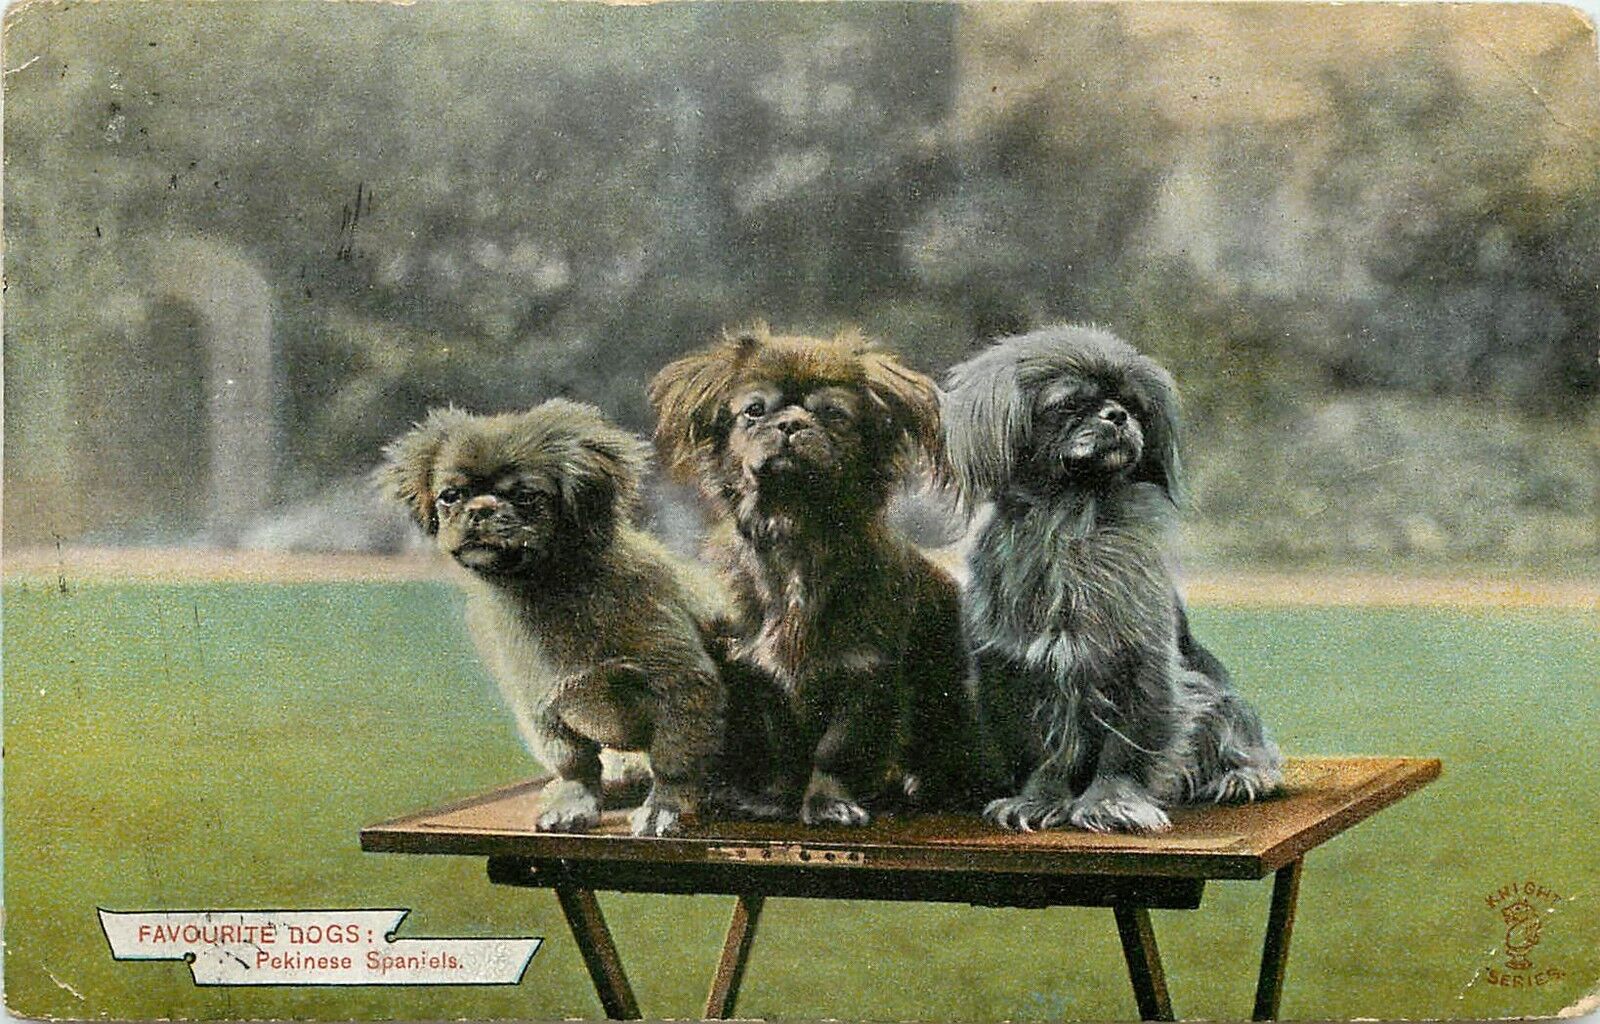 c1910 Dog Postcard; Knight Favorite Dogs Series 1709, Pekinese Spaniels, Posted